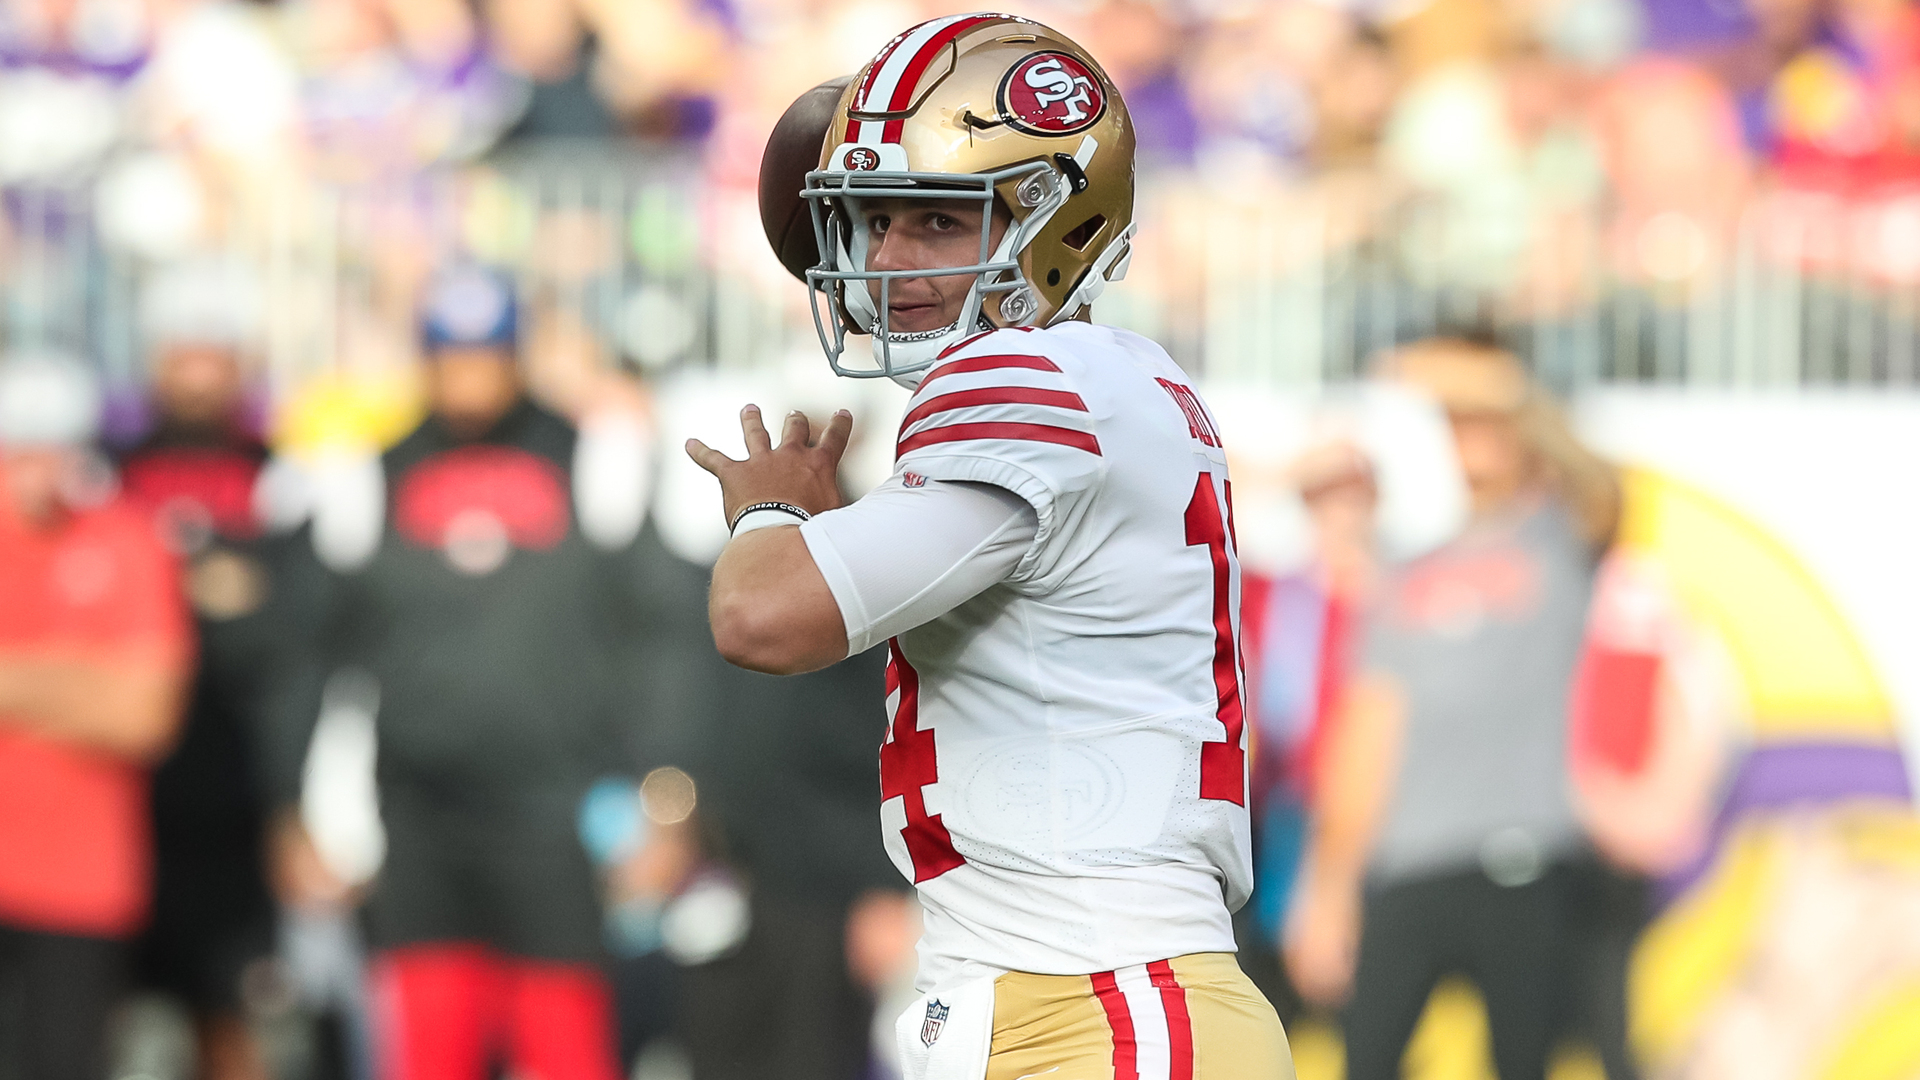 49ers' QB Brock Purdy has 'done his part' for roster spot, John Lynch says - NBC Sports